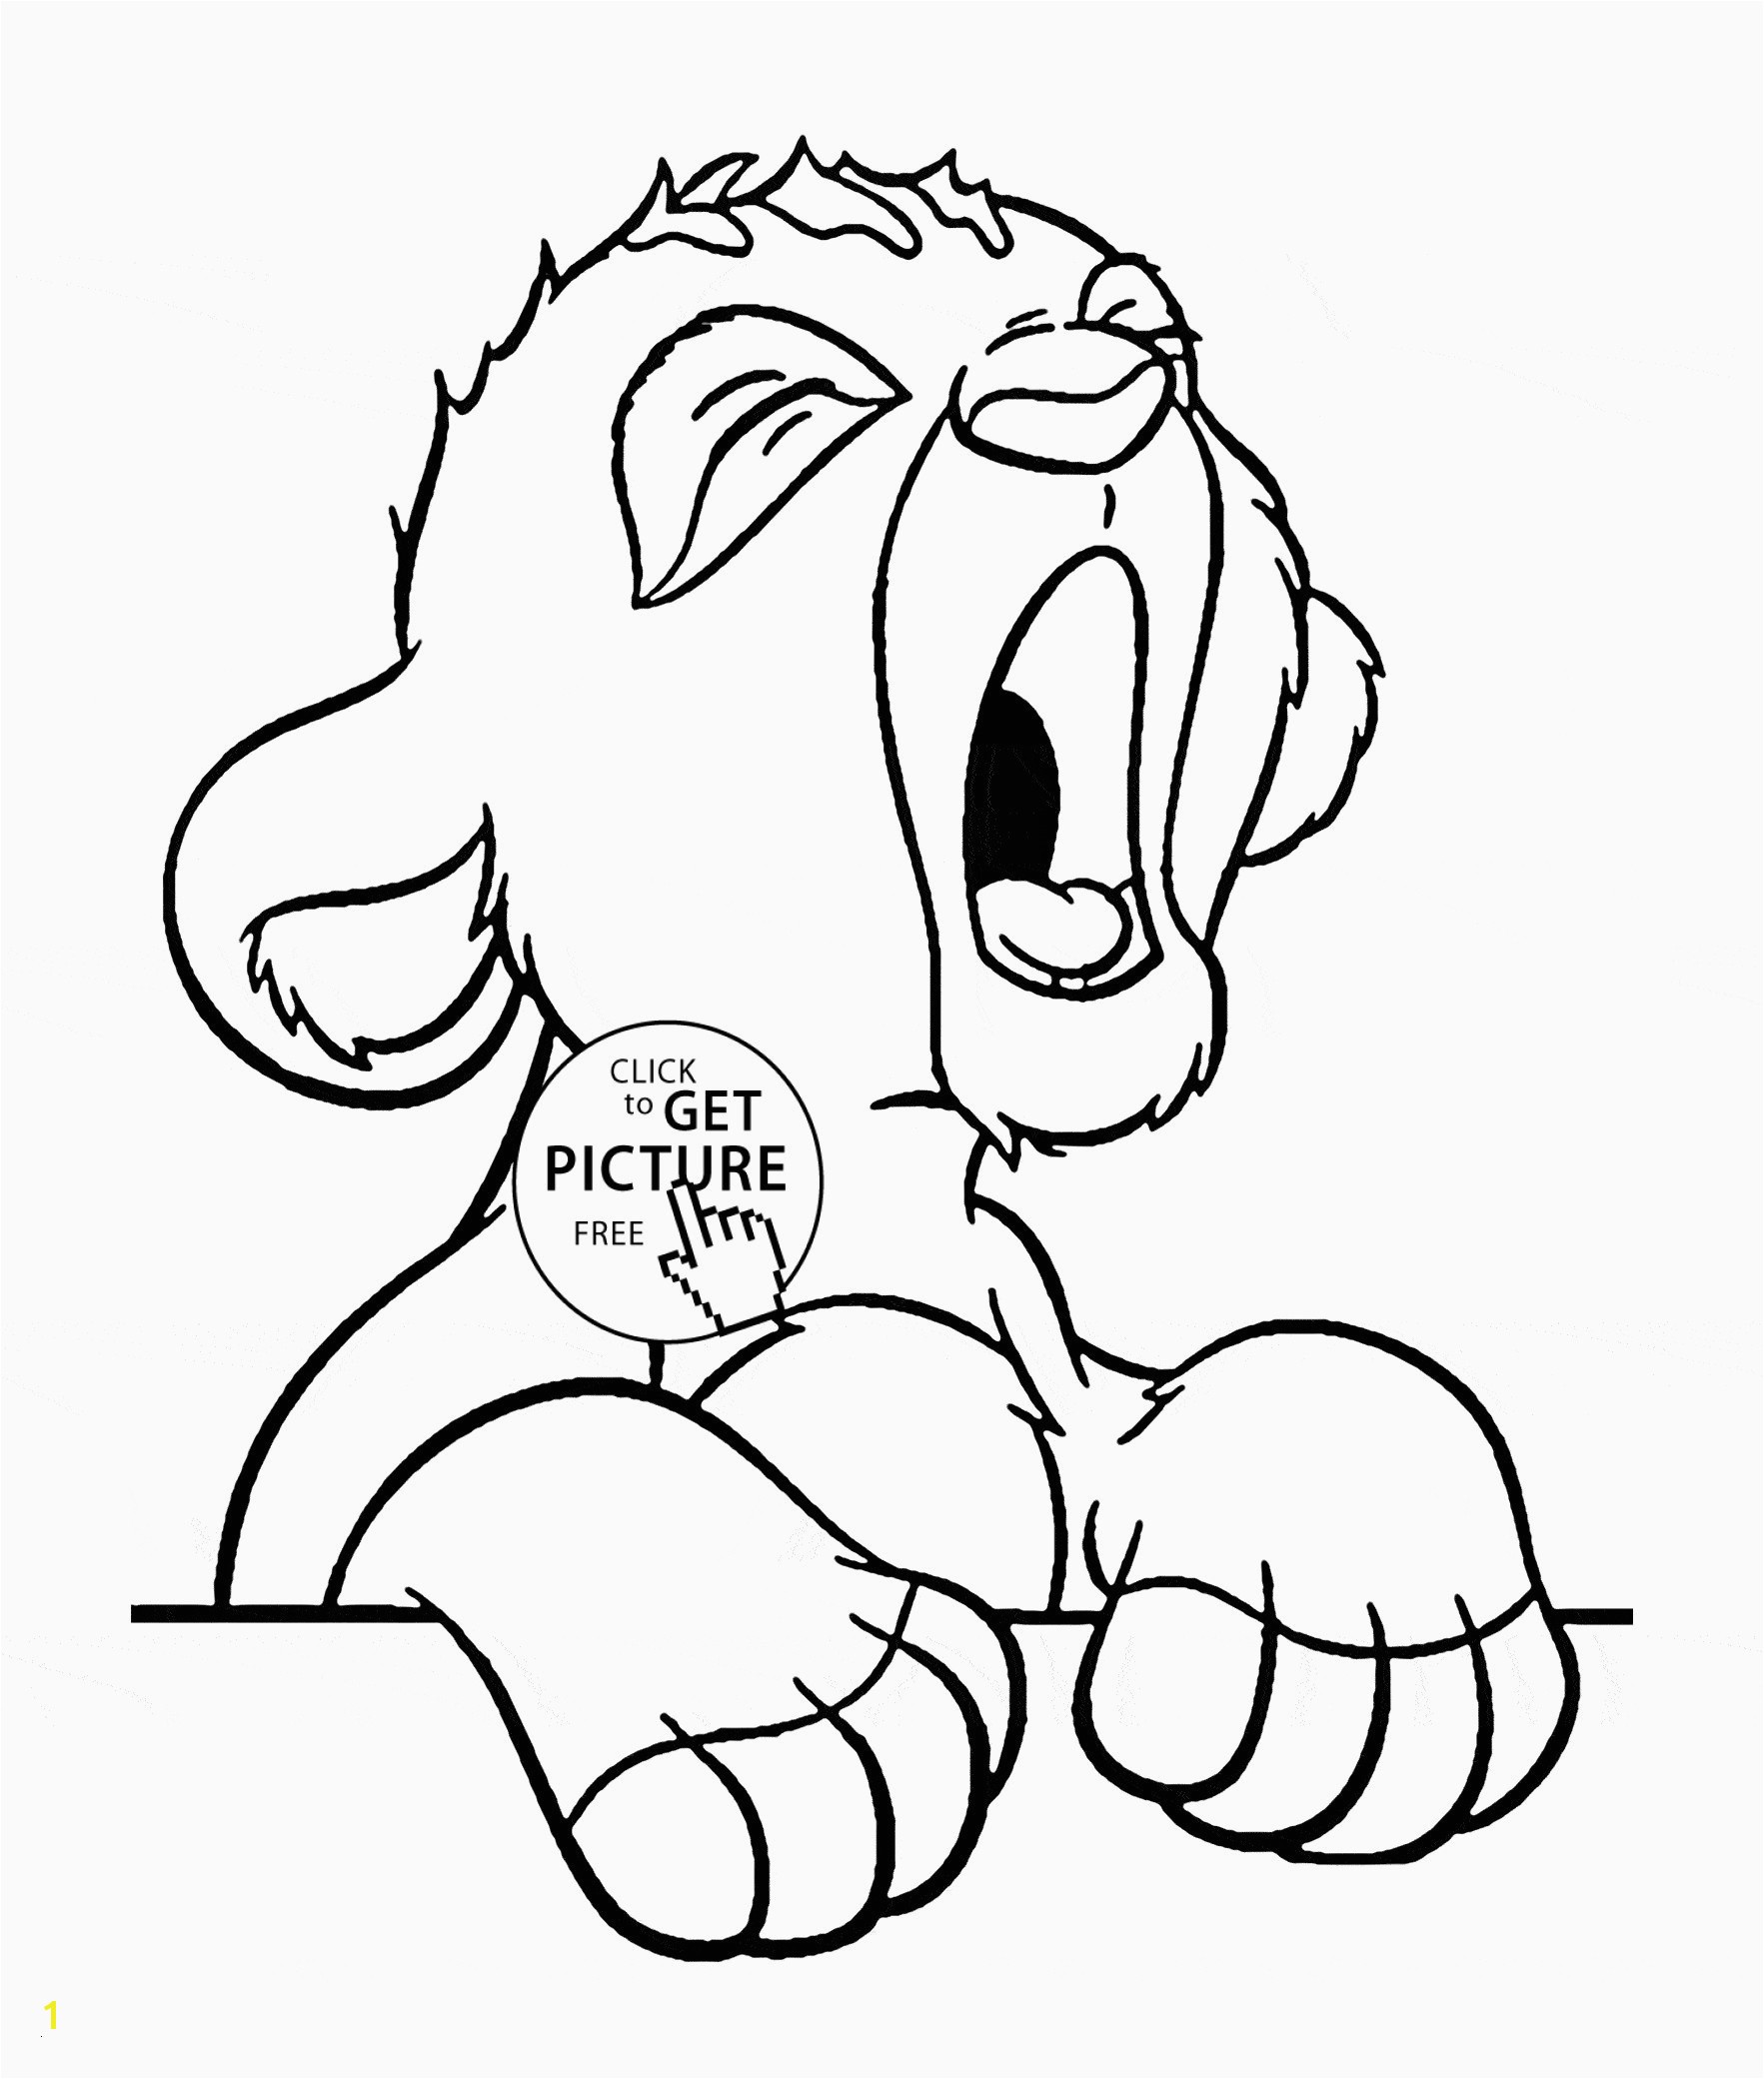 Zoo Animal Coloring Pages New Cute Baby Animal Coloring Pages Elegant New Od Dog Coloring Pages